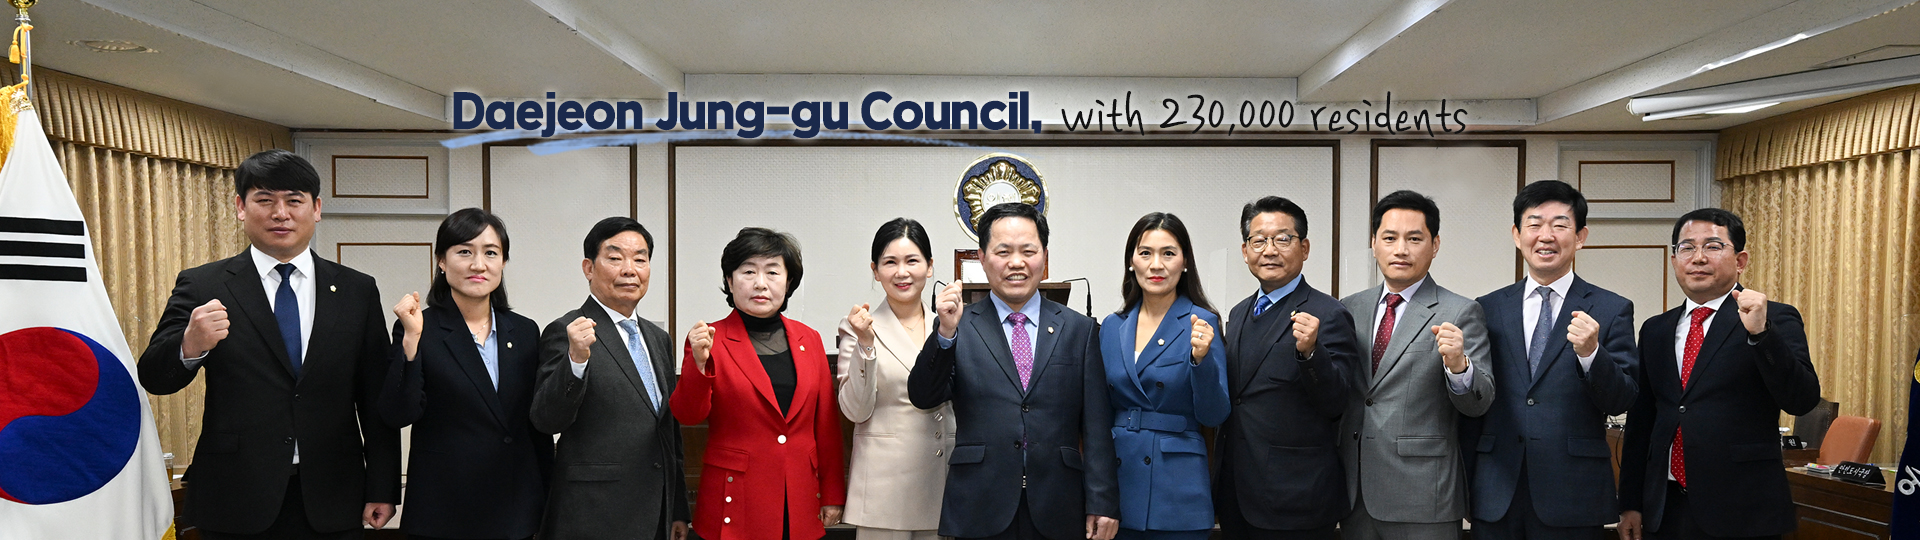 Daejeon Jung-gu Council, with 230,000 residents